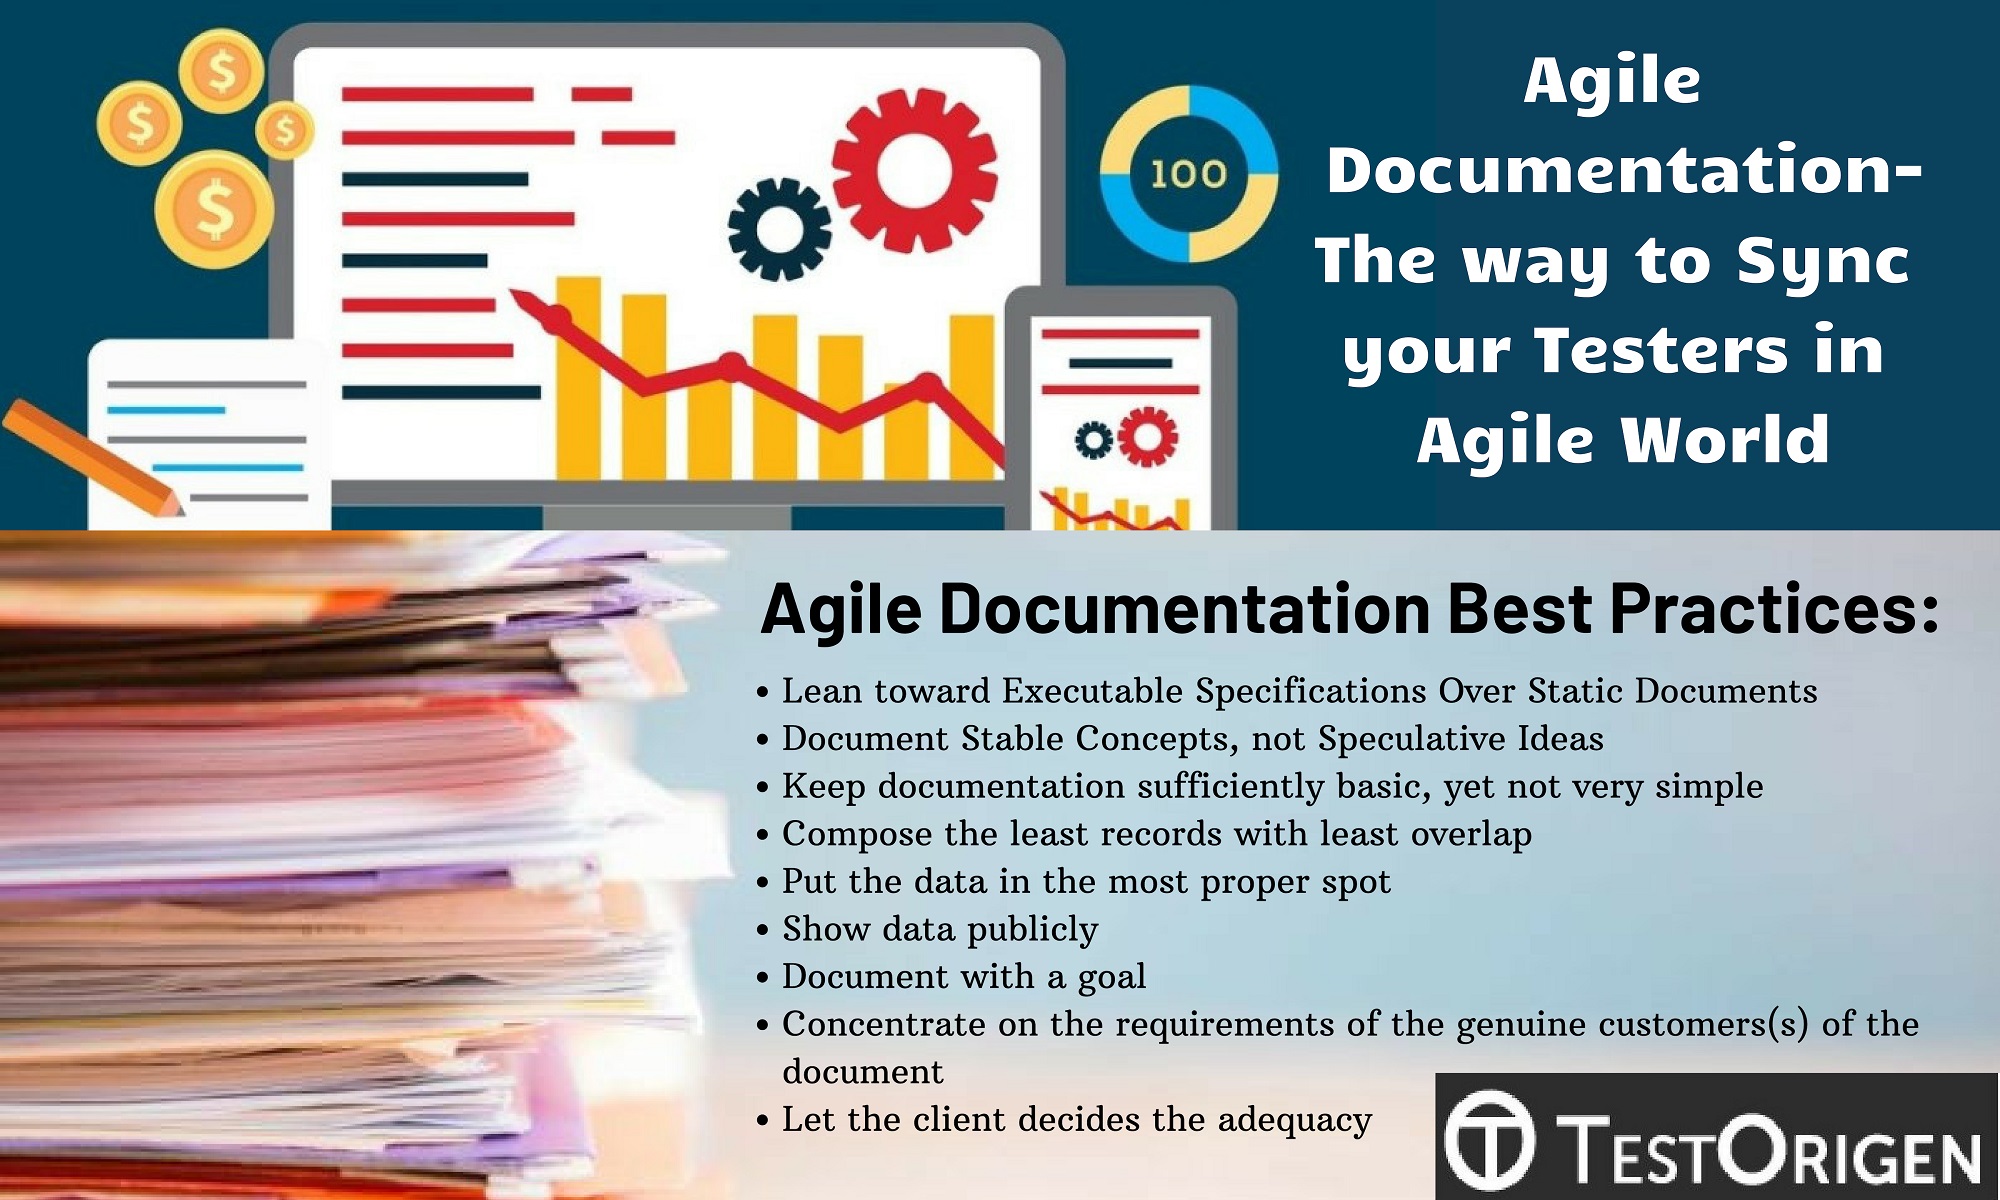 Agile Documentation-The way to Sync your Testers in Agile World. agile methodology documentation